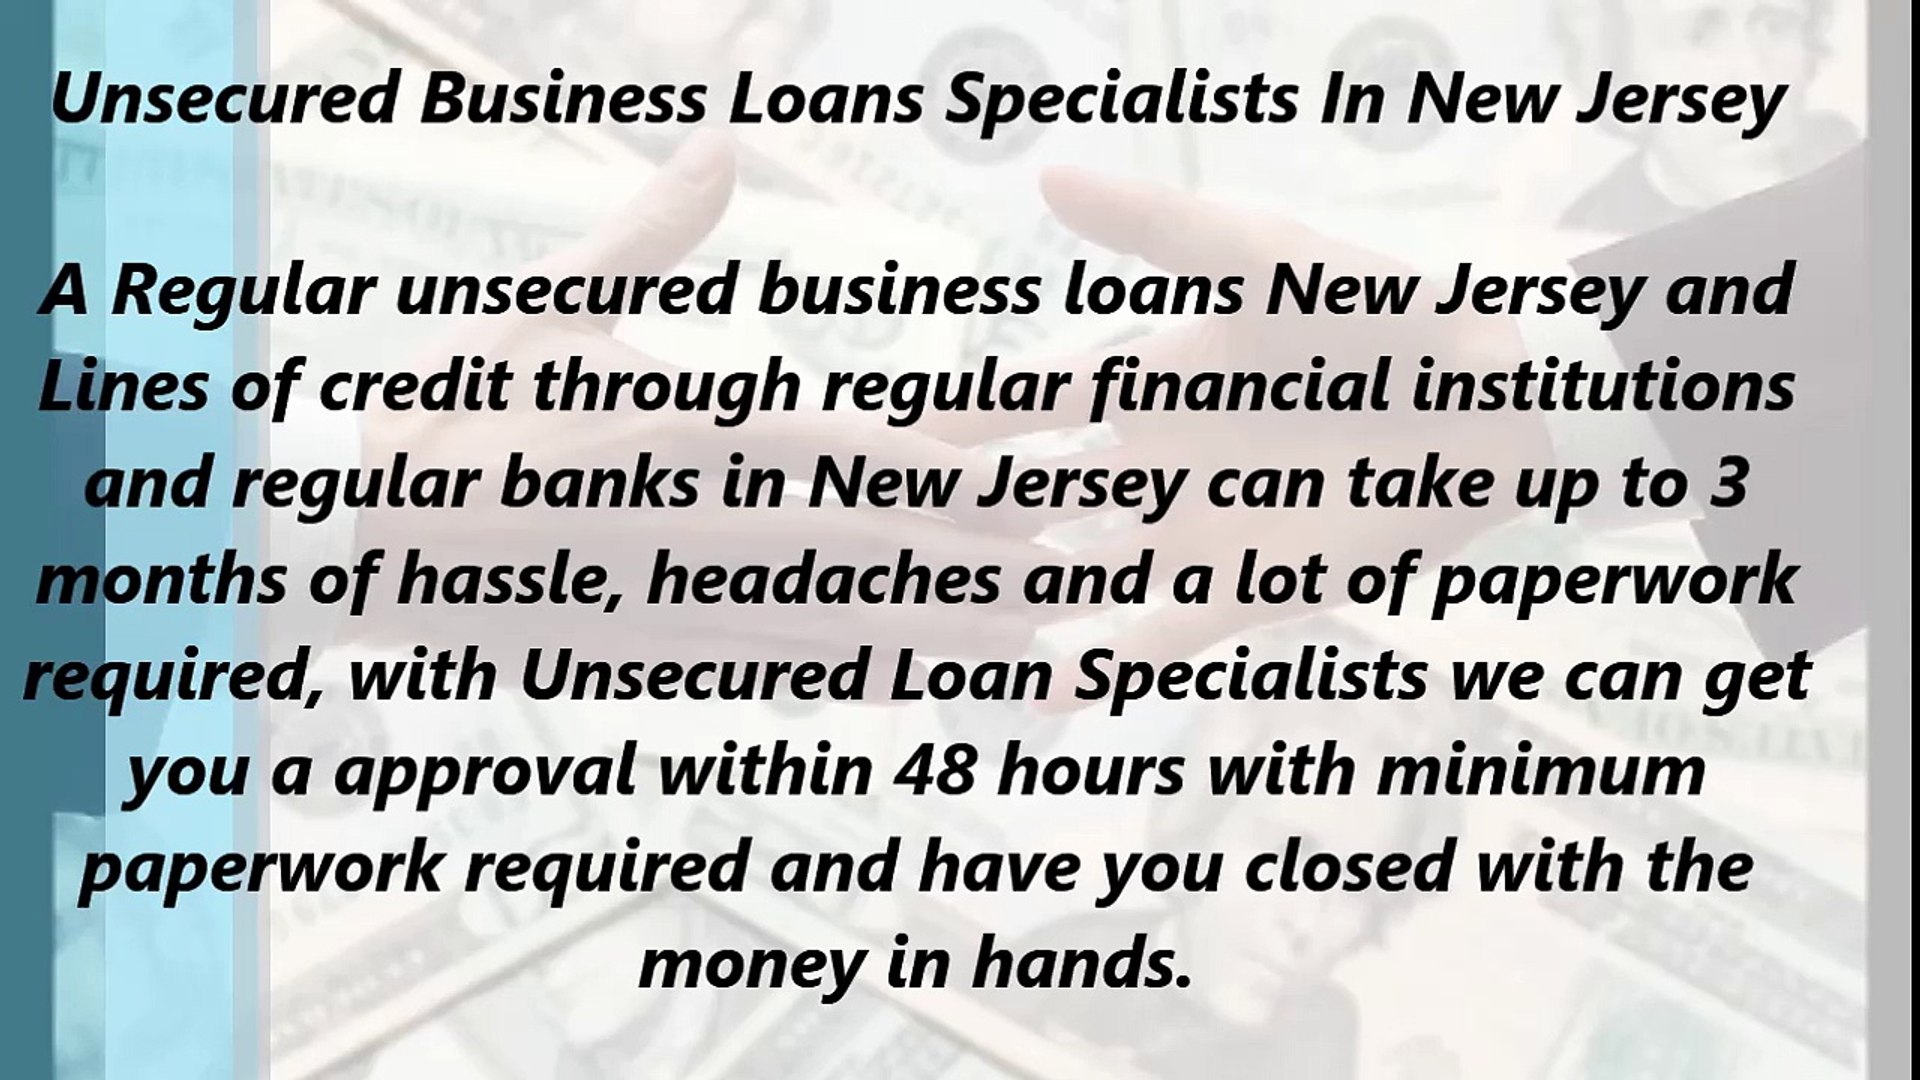 Unsecured Business Loans Specialists In New Jersey (866.854.7904)